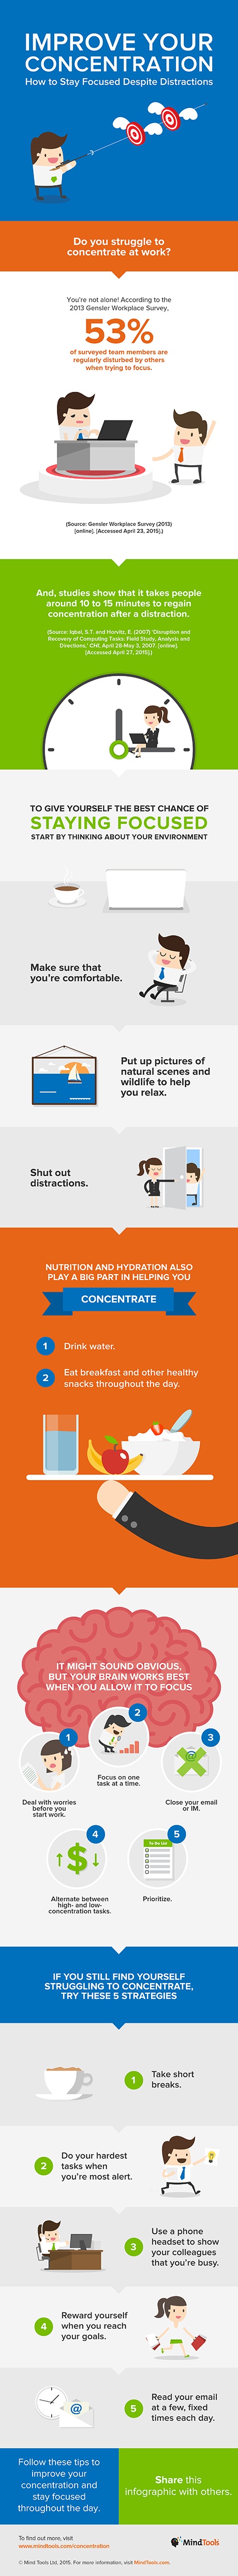 improve-your-concentration-infographic_460x4983